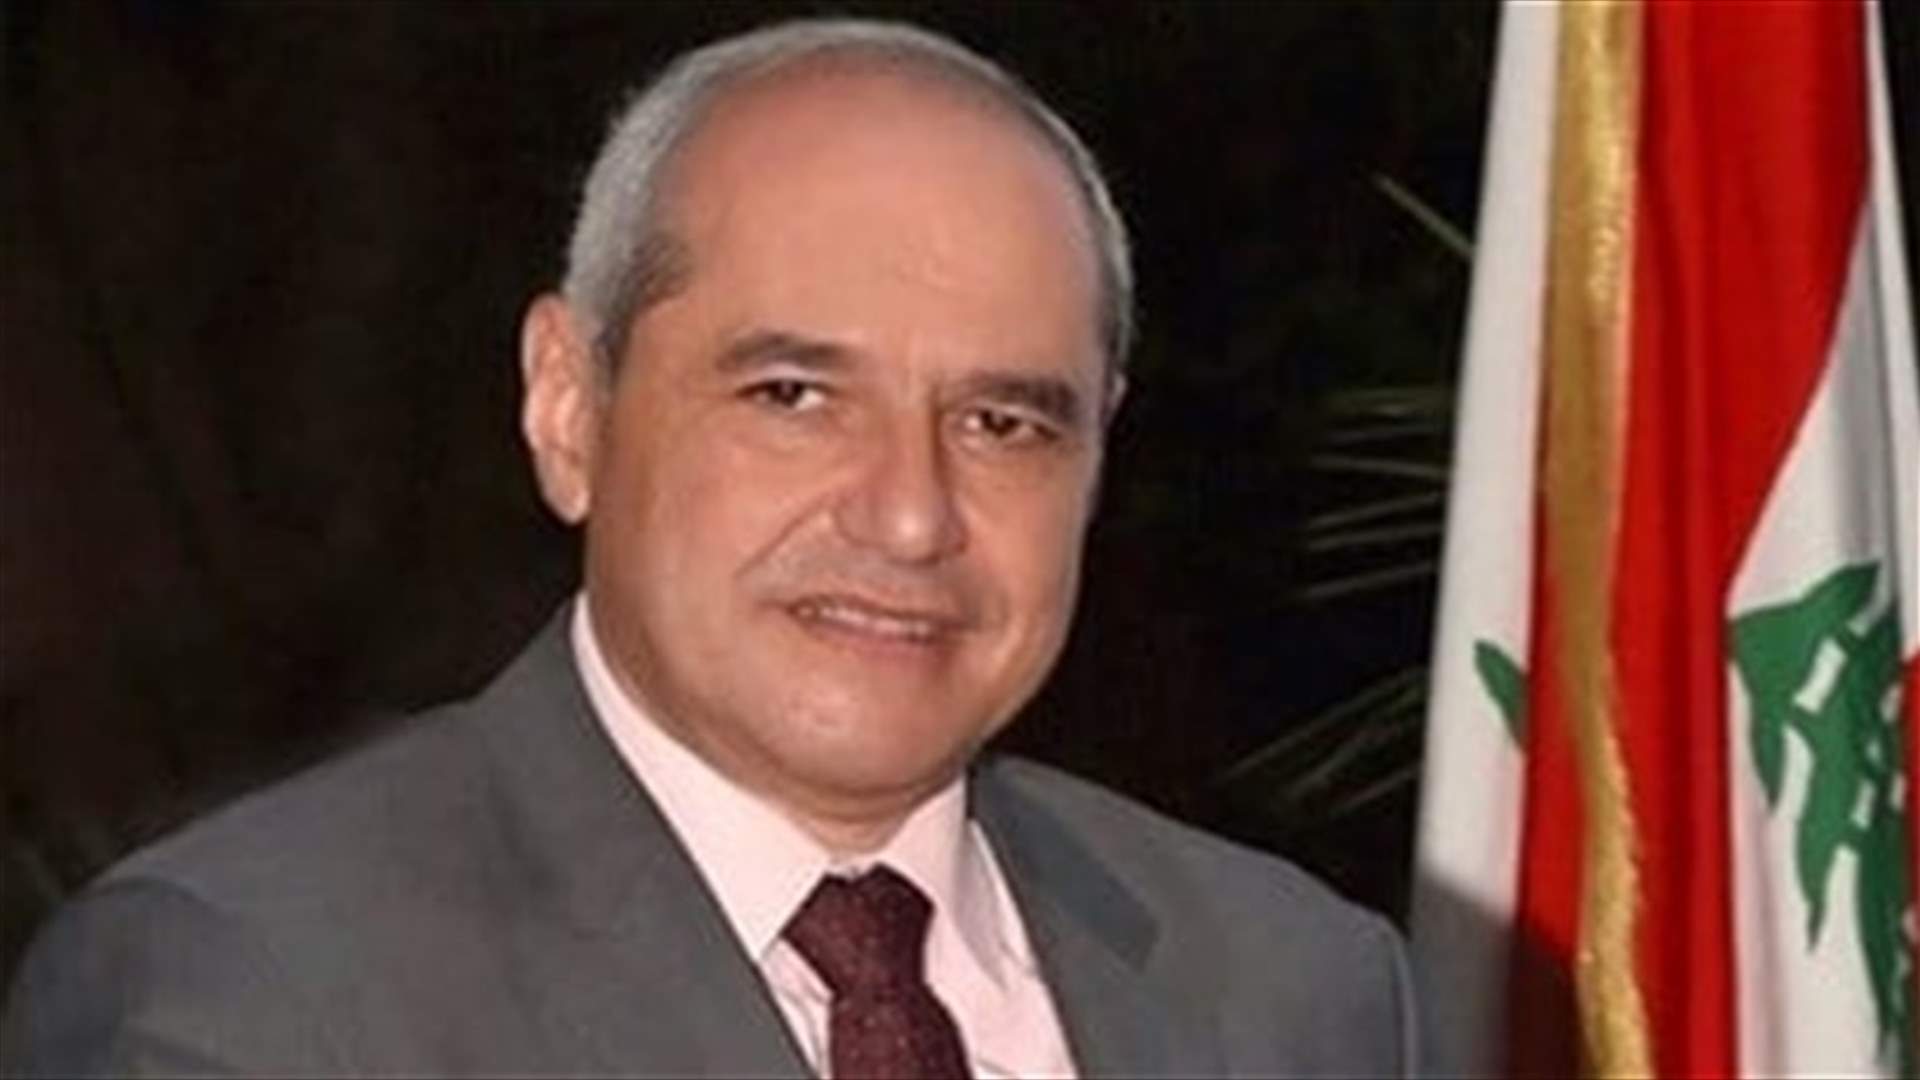 Melhem Khalaf: Country’s situation precarious, and responsibility entrusted to lawyers is heavy